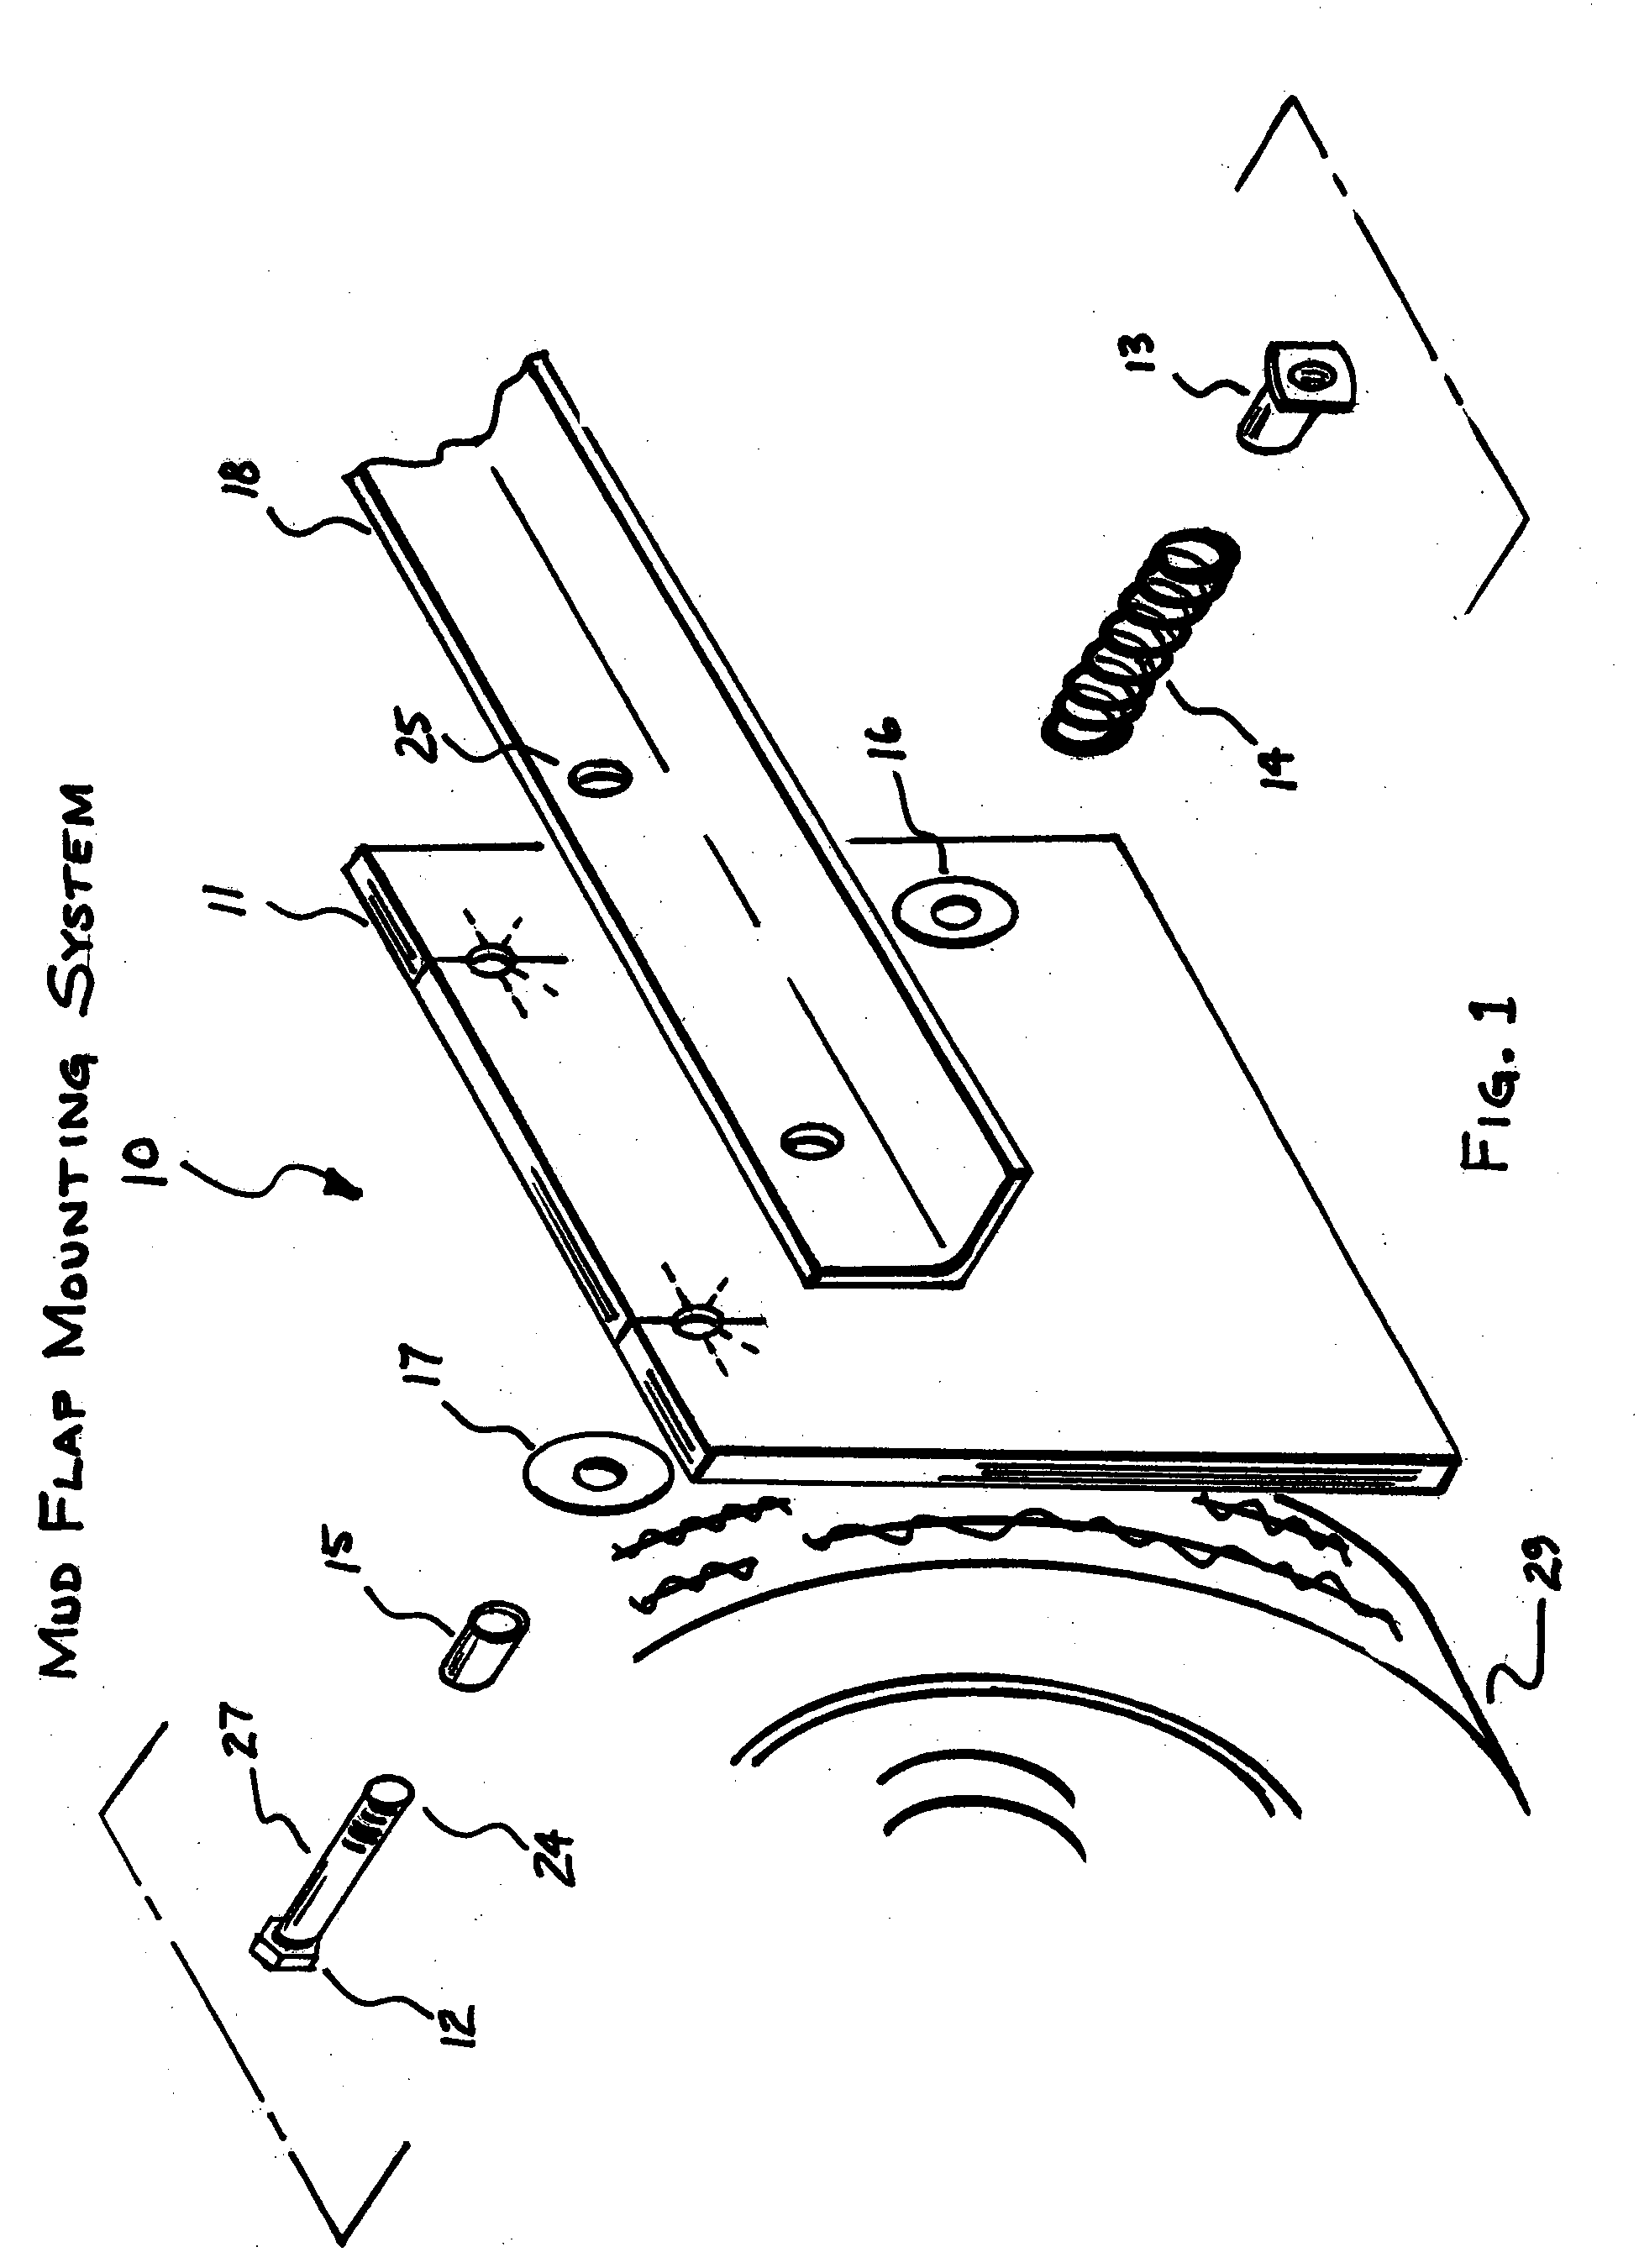 Mud flap mounting system and method for use thereof